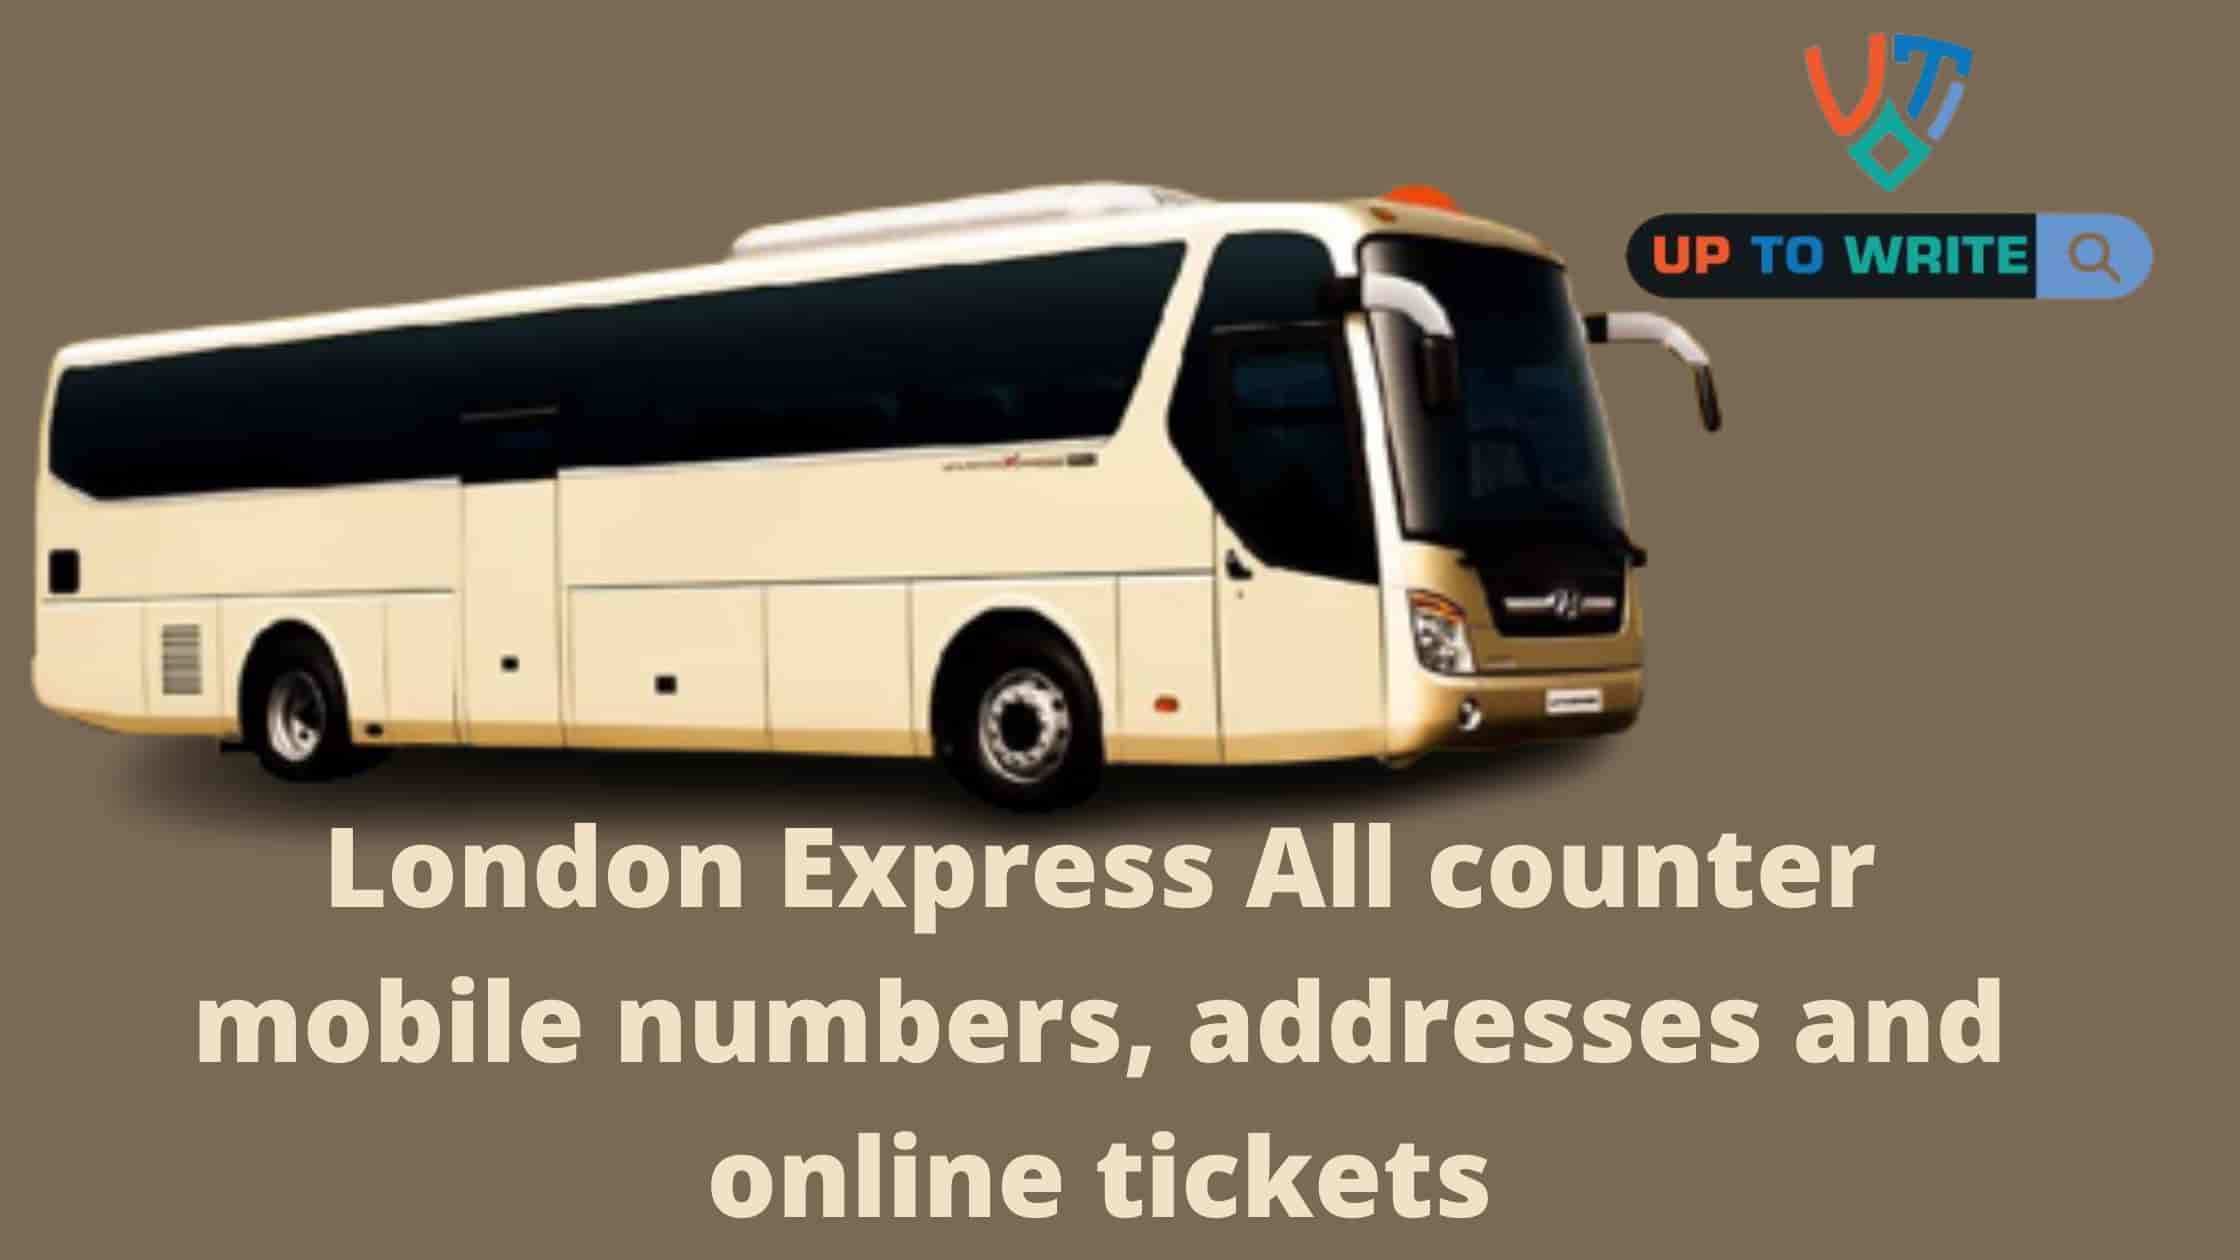 London Express All counter mobile numbers, addresses and online tickets